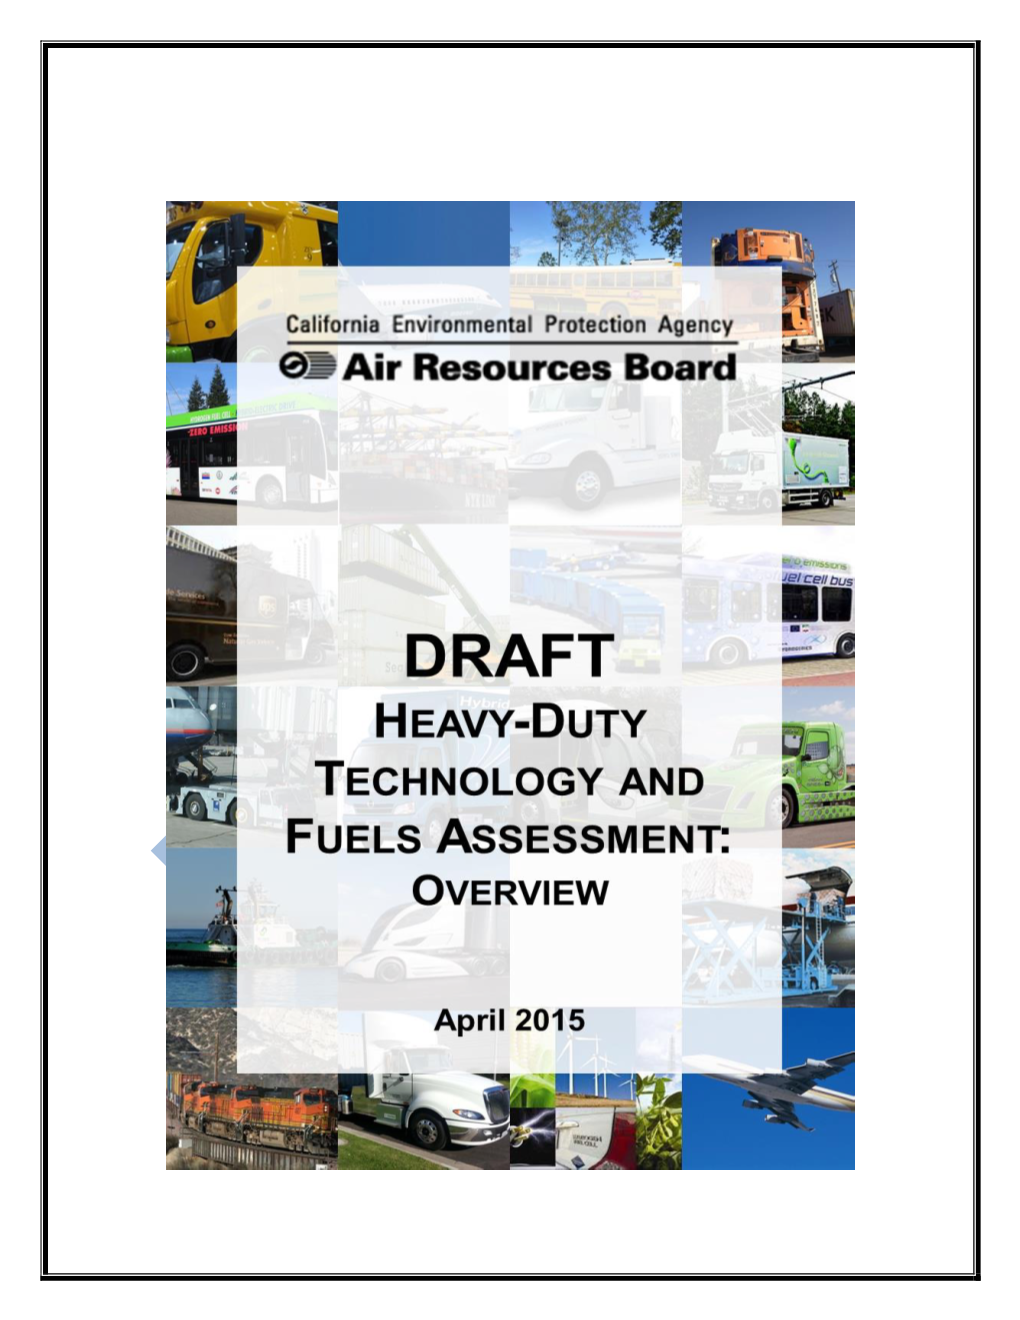 Draft Heavy-Duty Technology and Fuels Assessment: Overview